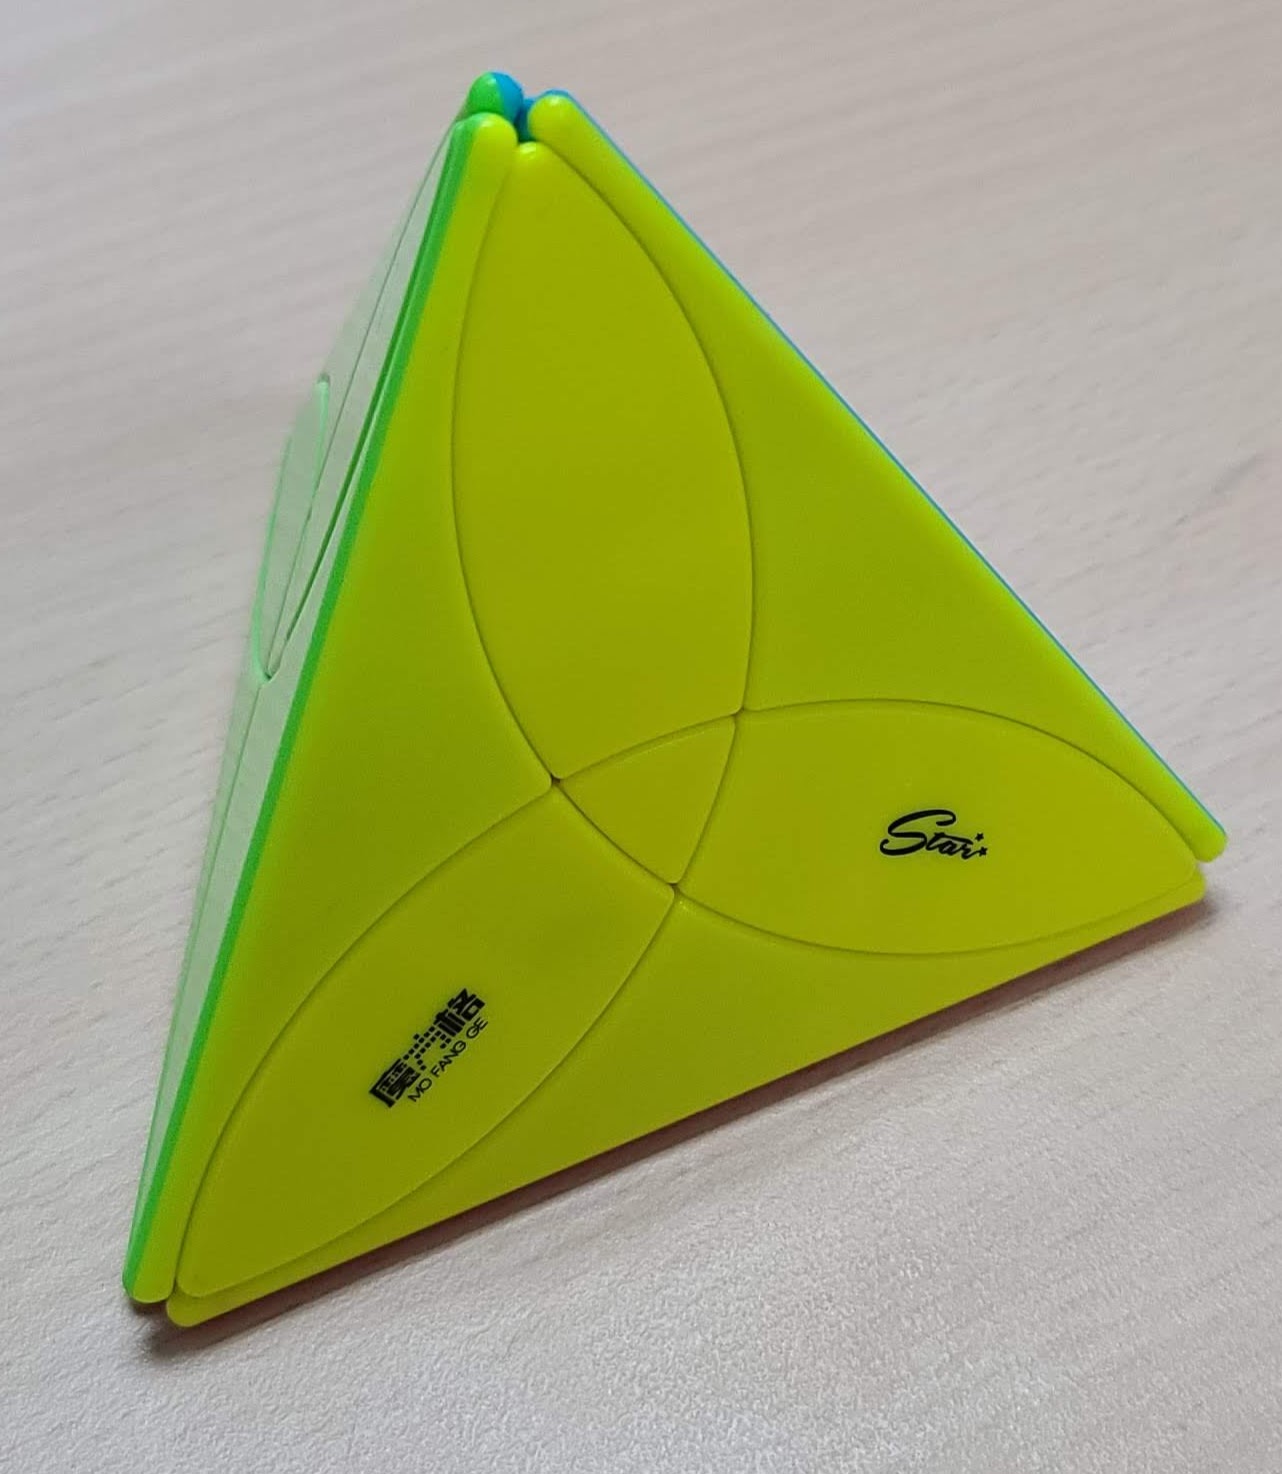 Read more about the article 奇藝三葉草魔方Clover Pyraminx